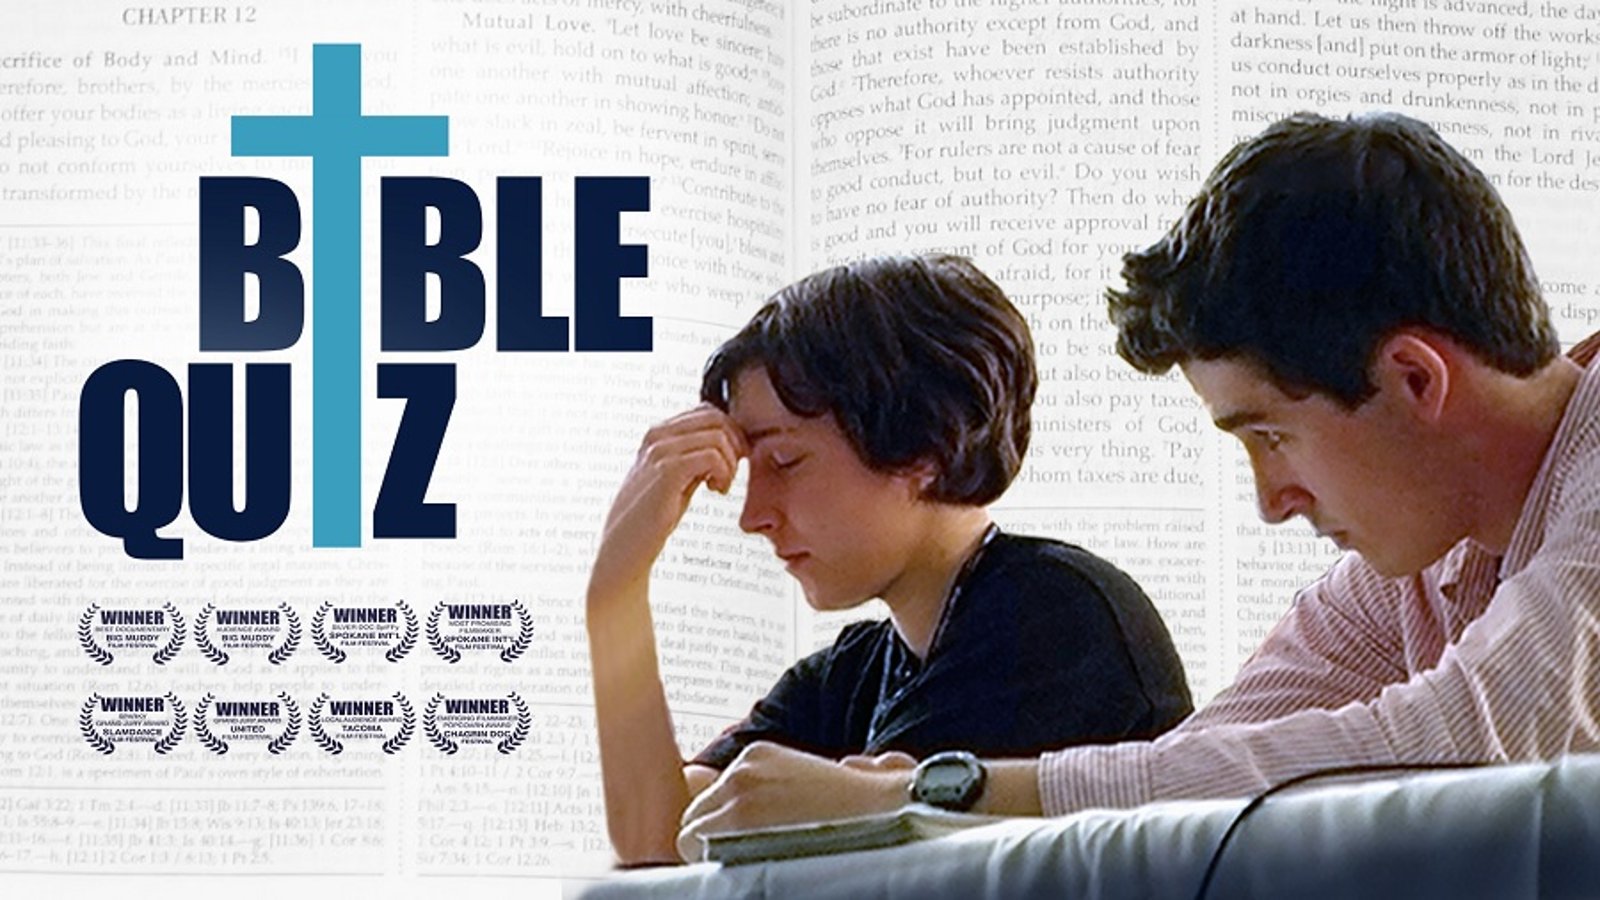 Bible Quiz - One Girl’s Quest for the National Bible Quiz Championship